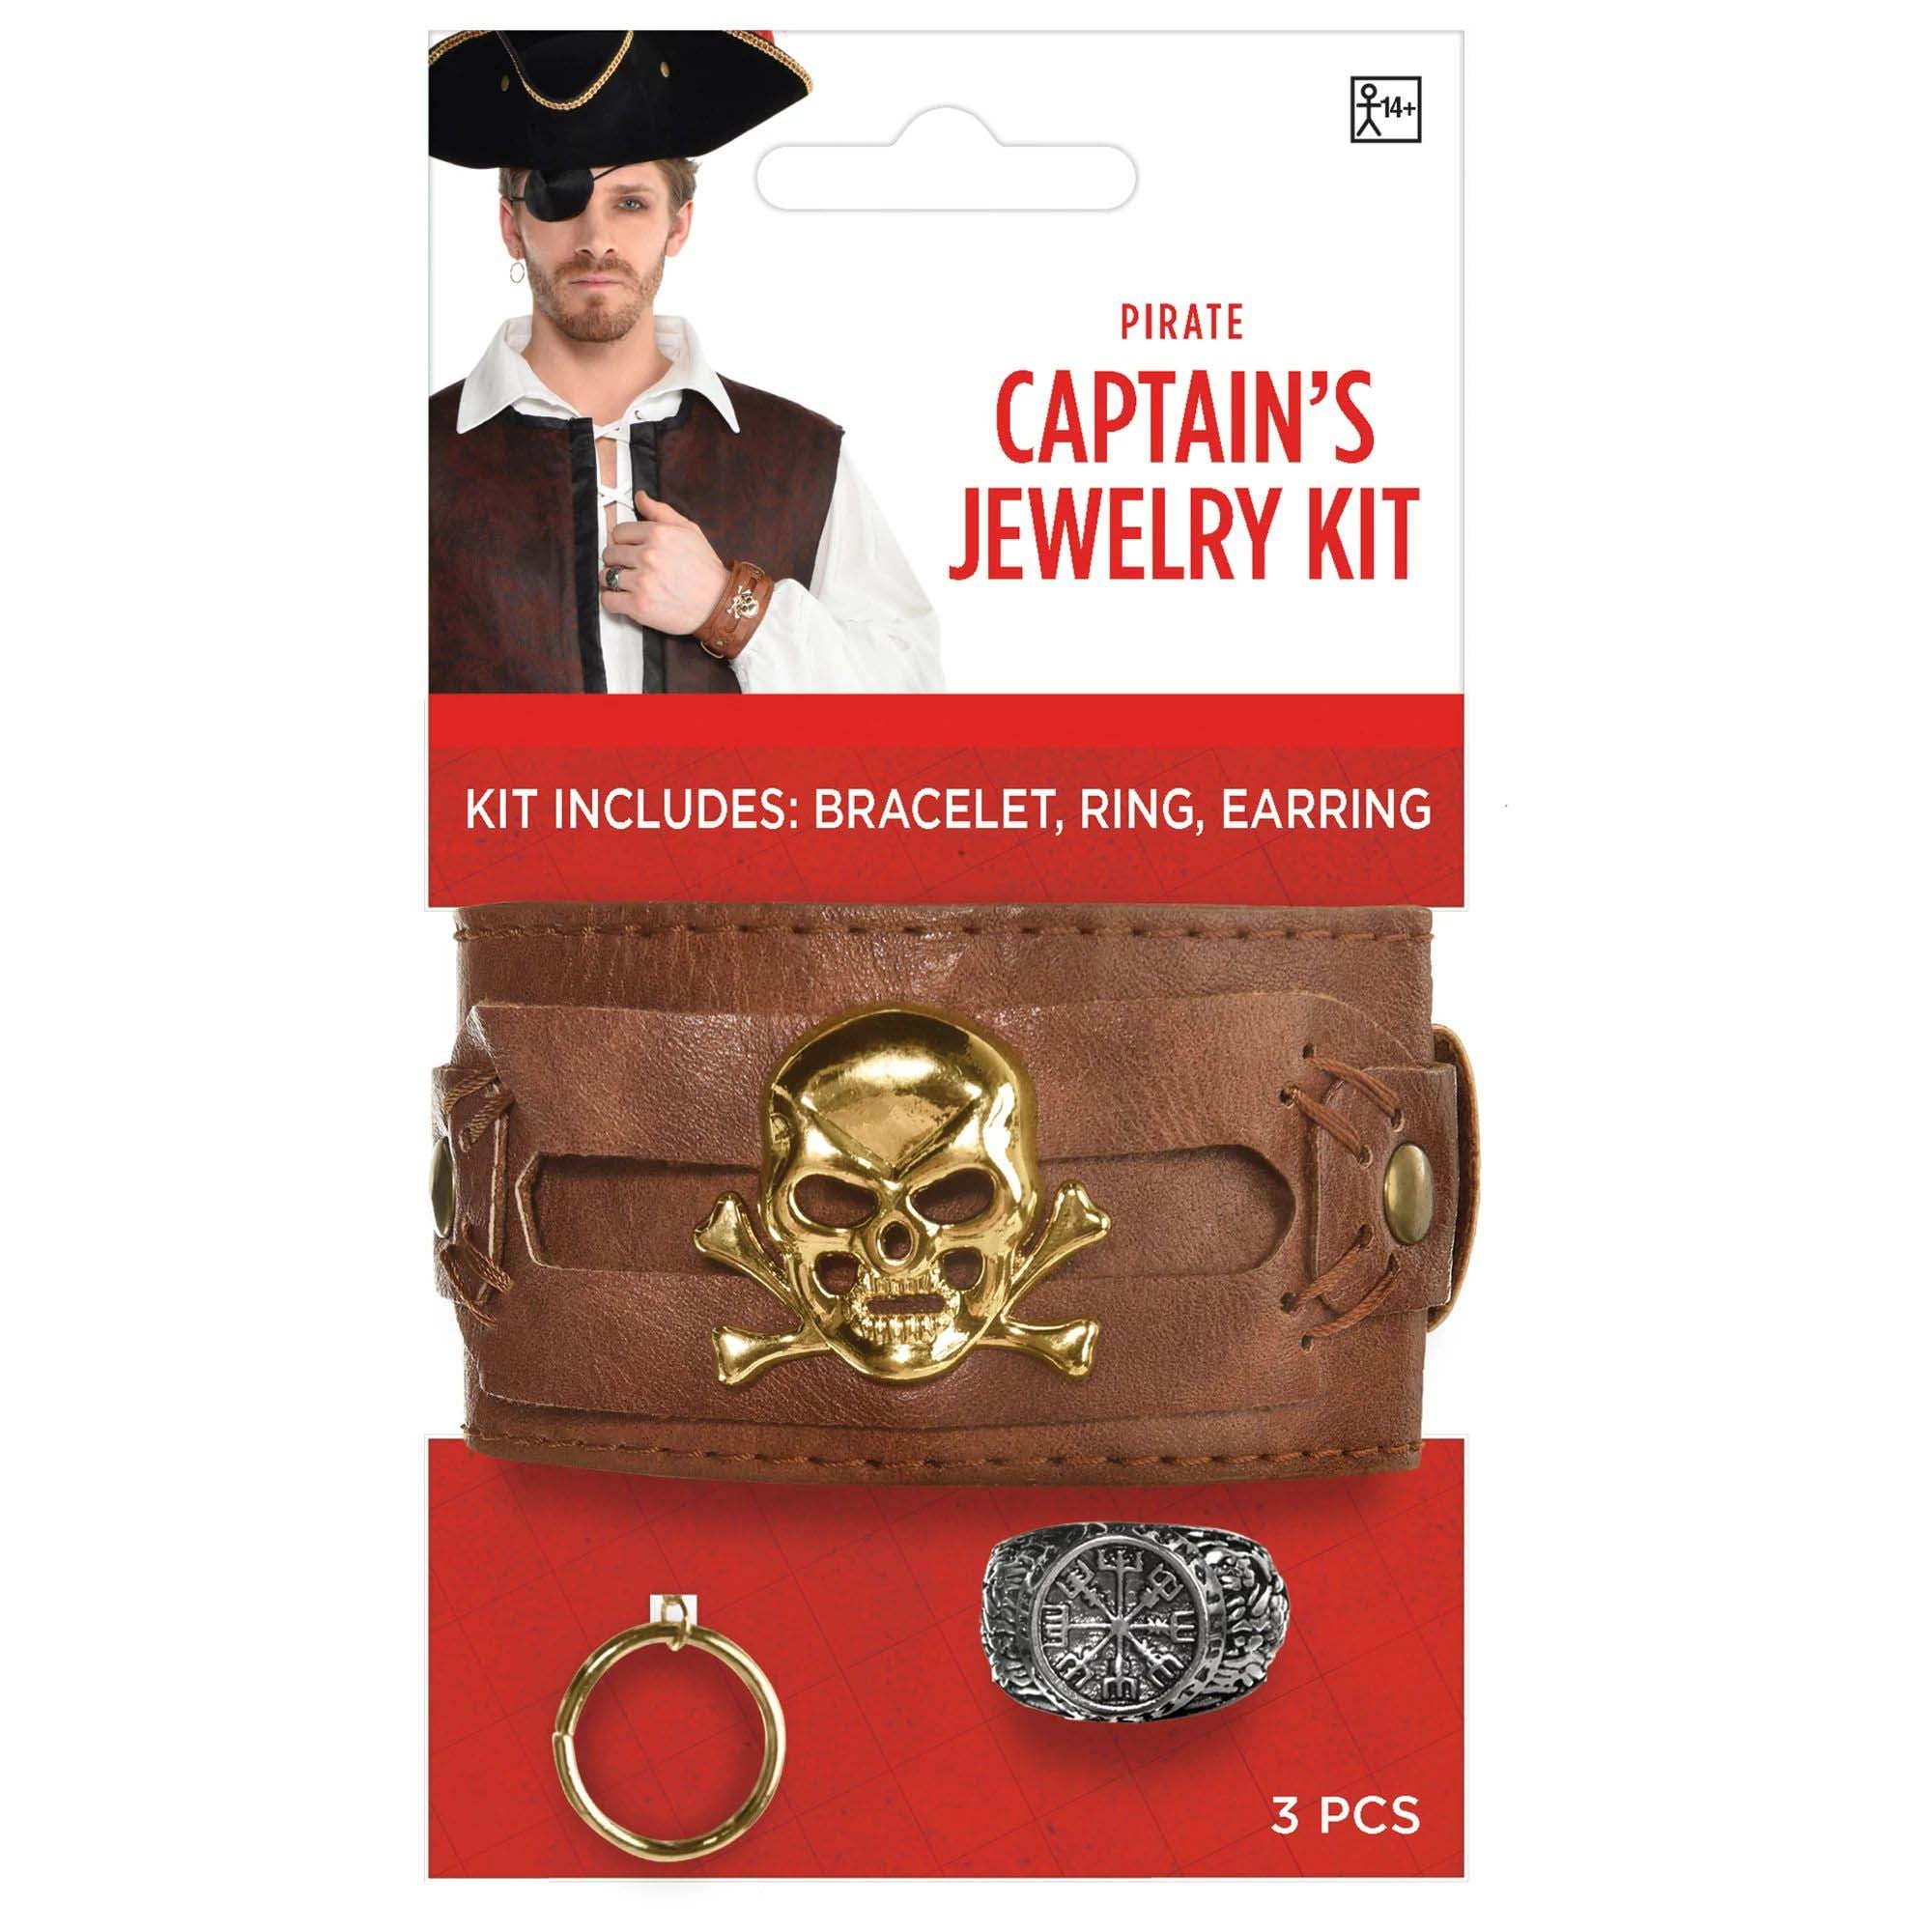 Pirate Captain Jewelry Kit for Adults